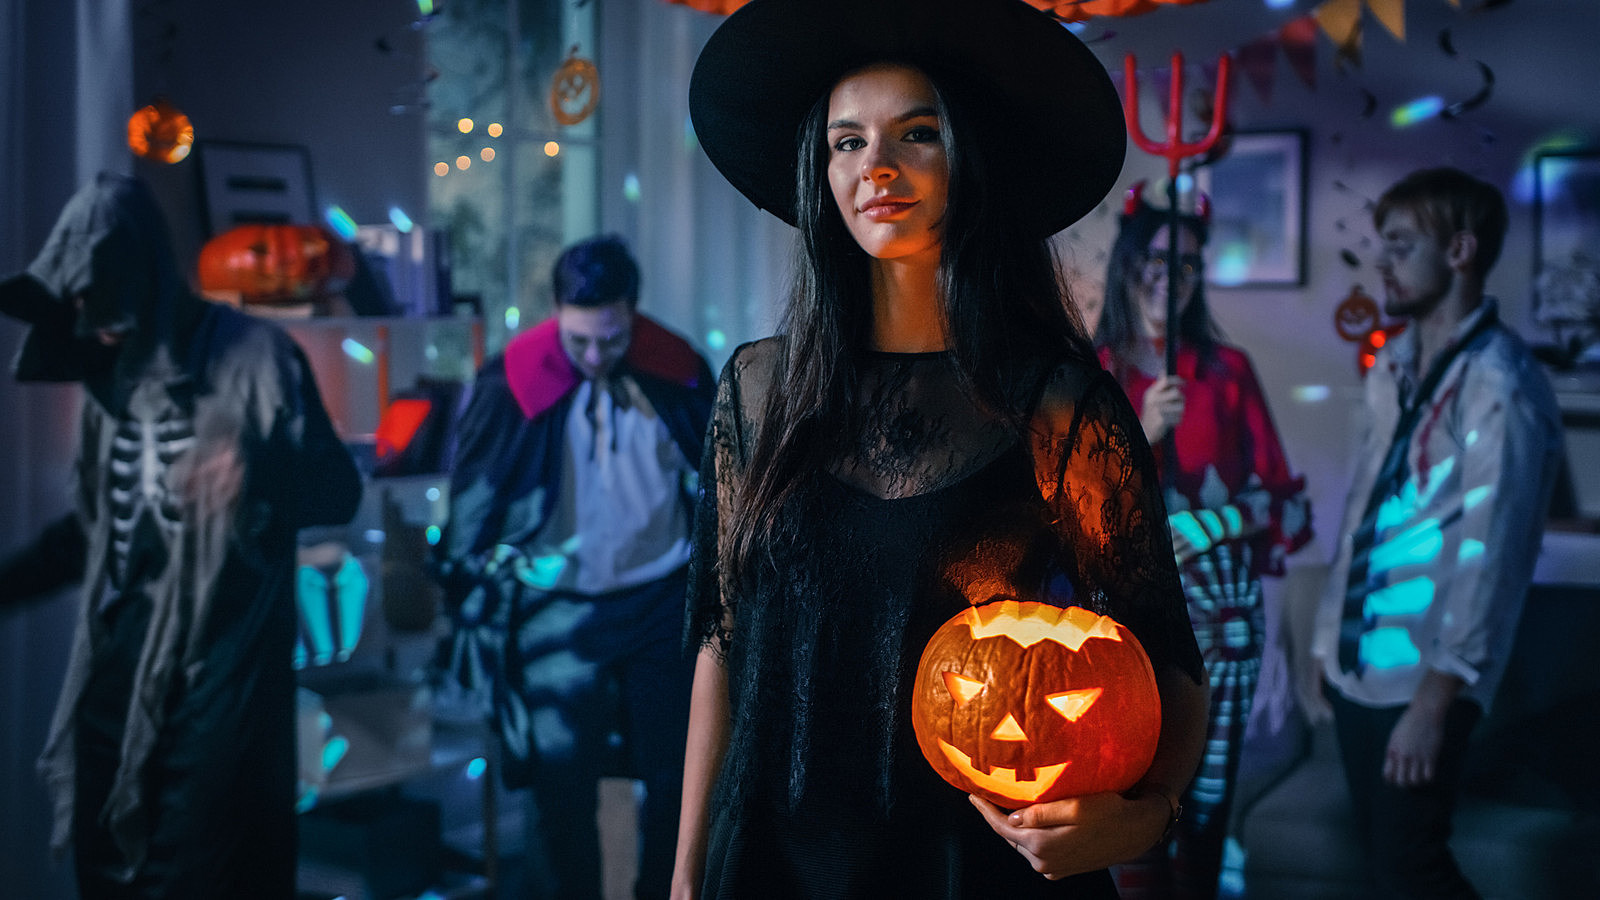 11 Halloween costumes predicted to be most popular this year